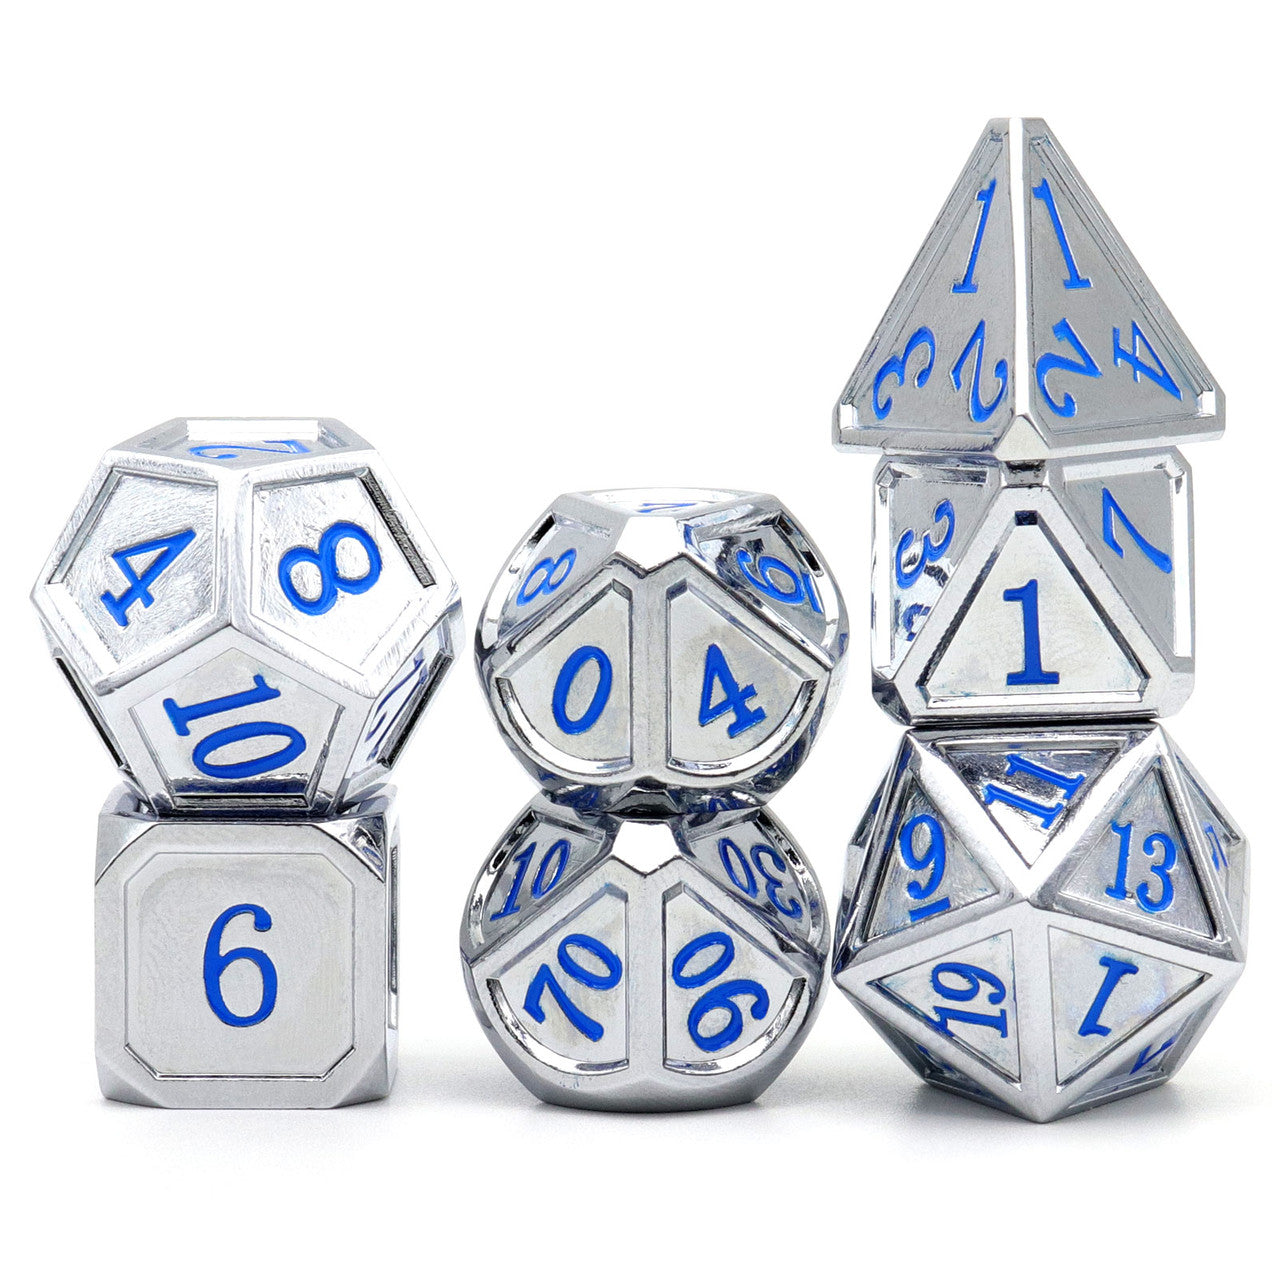 Haxtec Classic Collection Metal DND Dice-Silver Blue Numbers